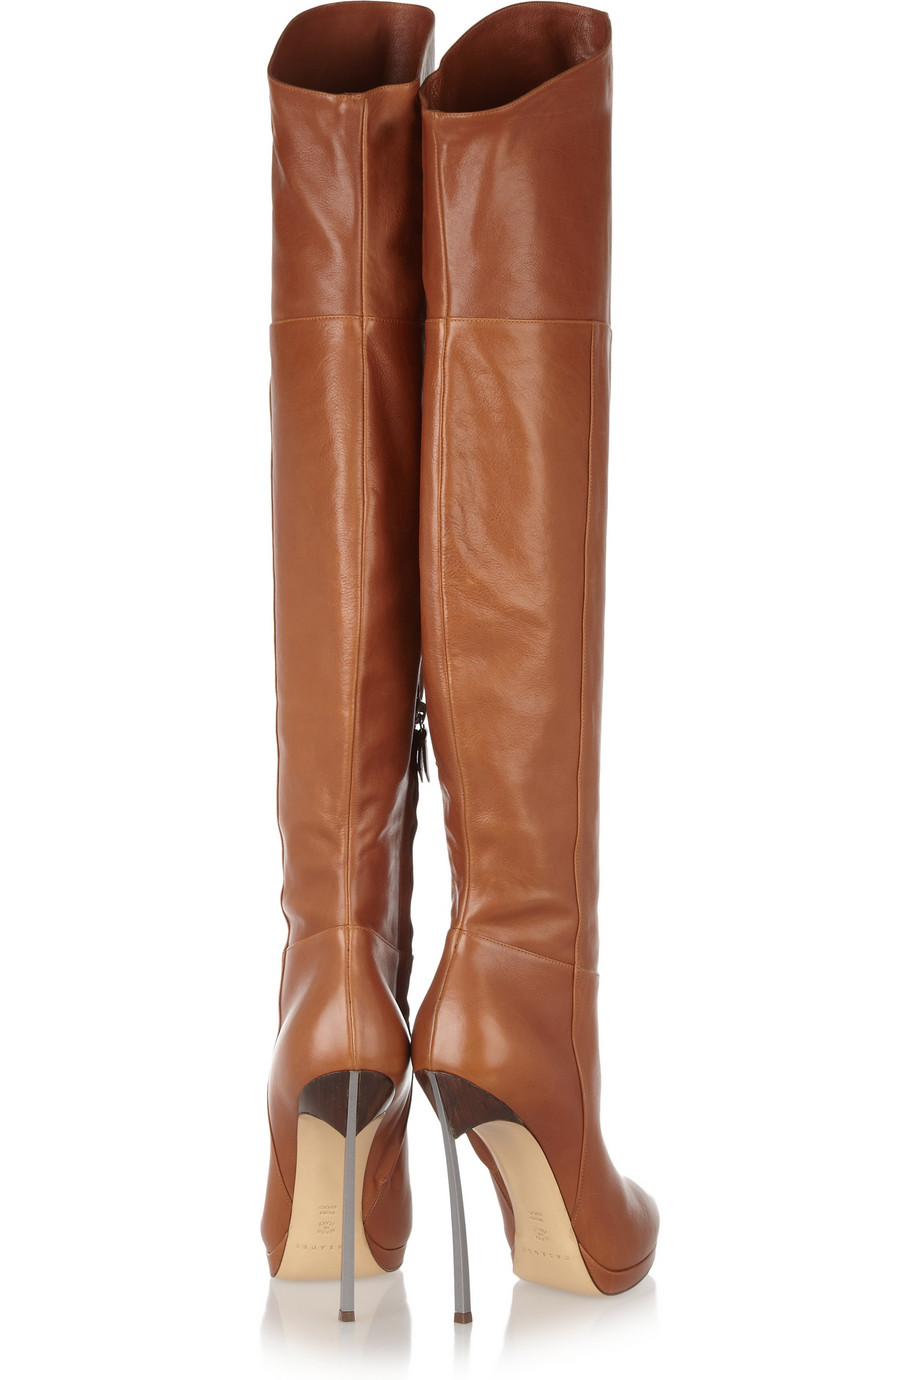 tan leather thigh high boots